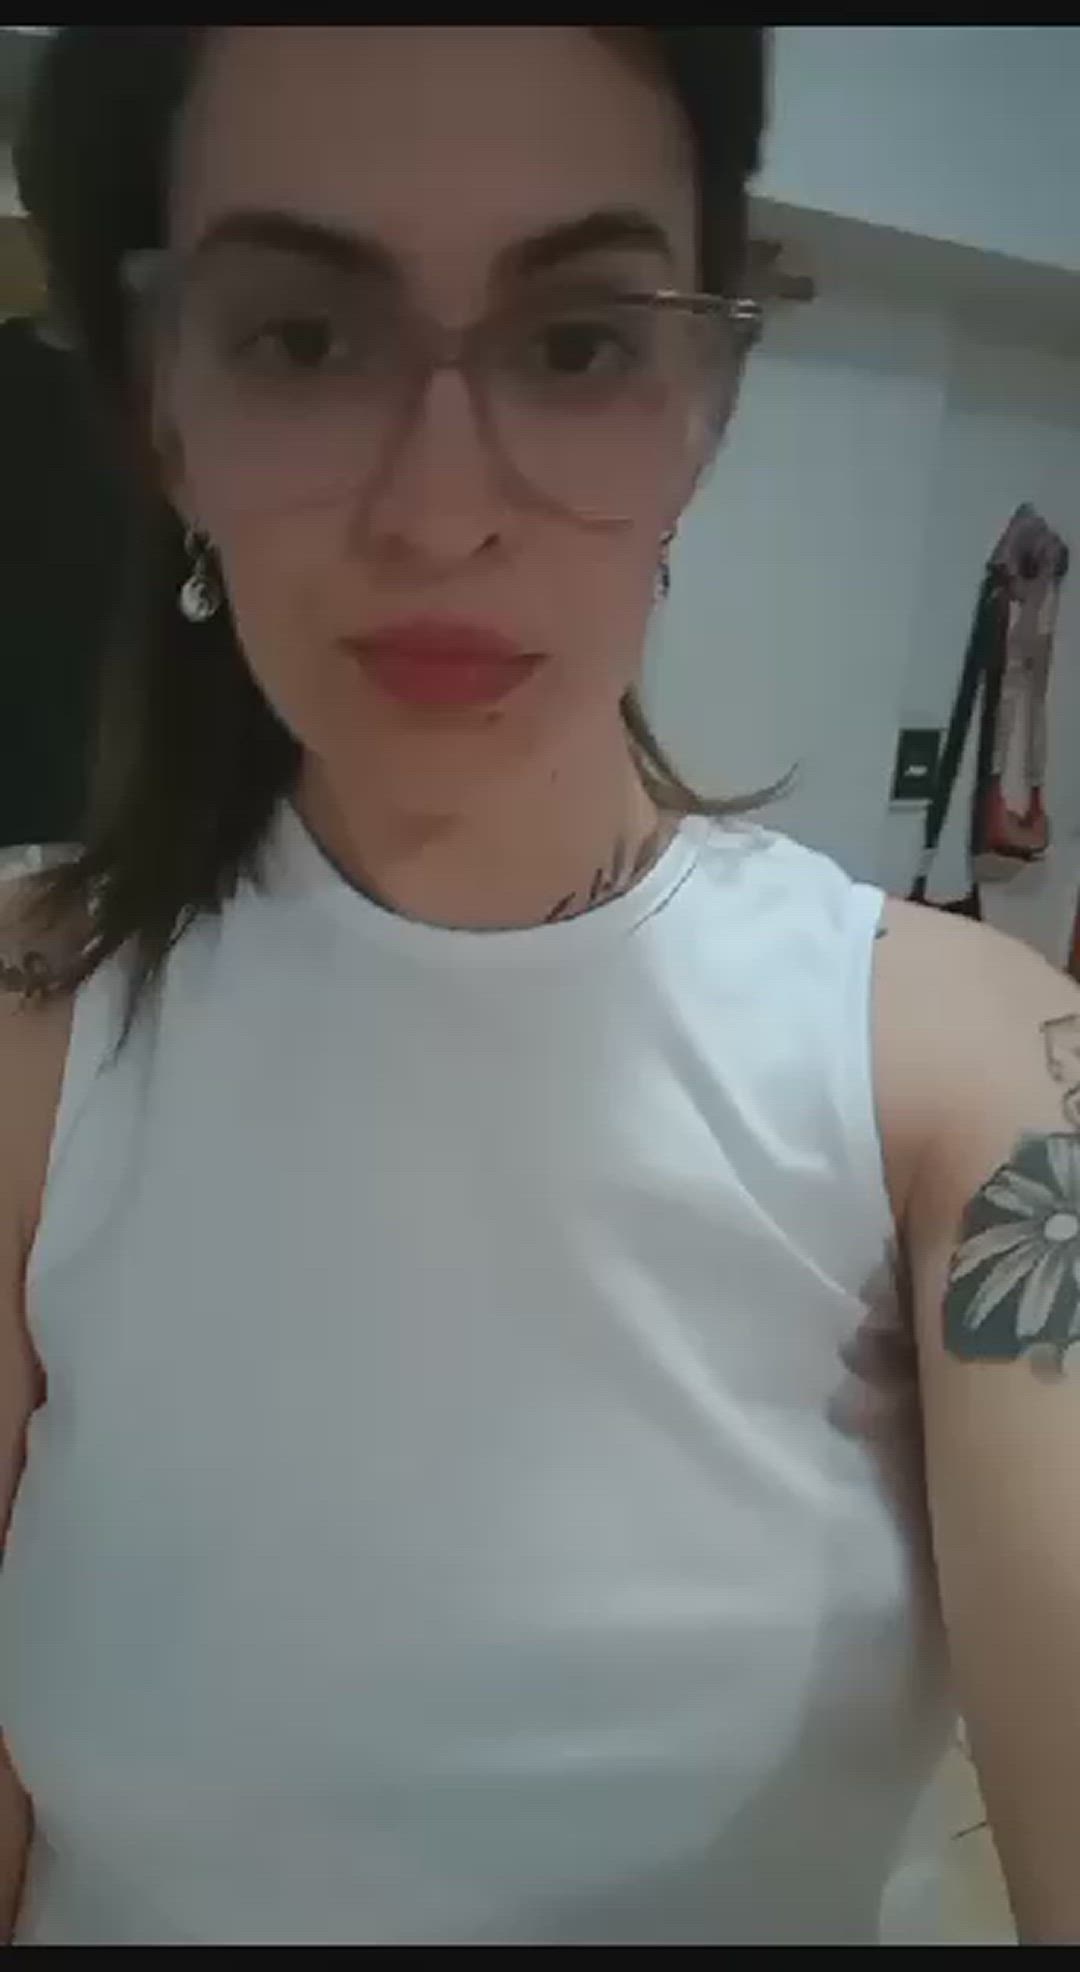 Ass porn video with onlyfans model meganxxxargentinian <strong>@meganfullgoddess</strong>